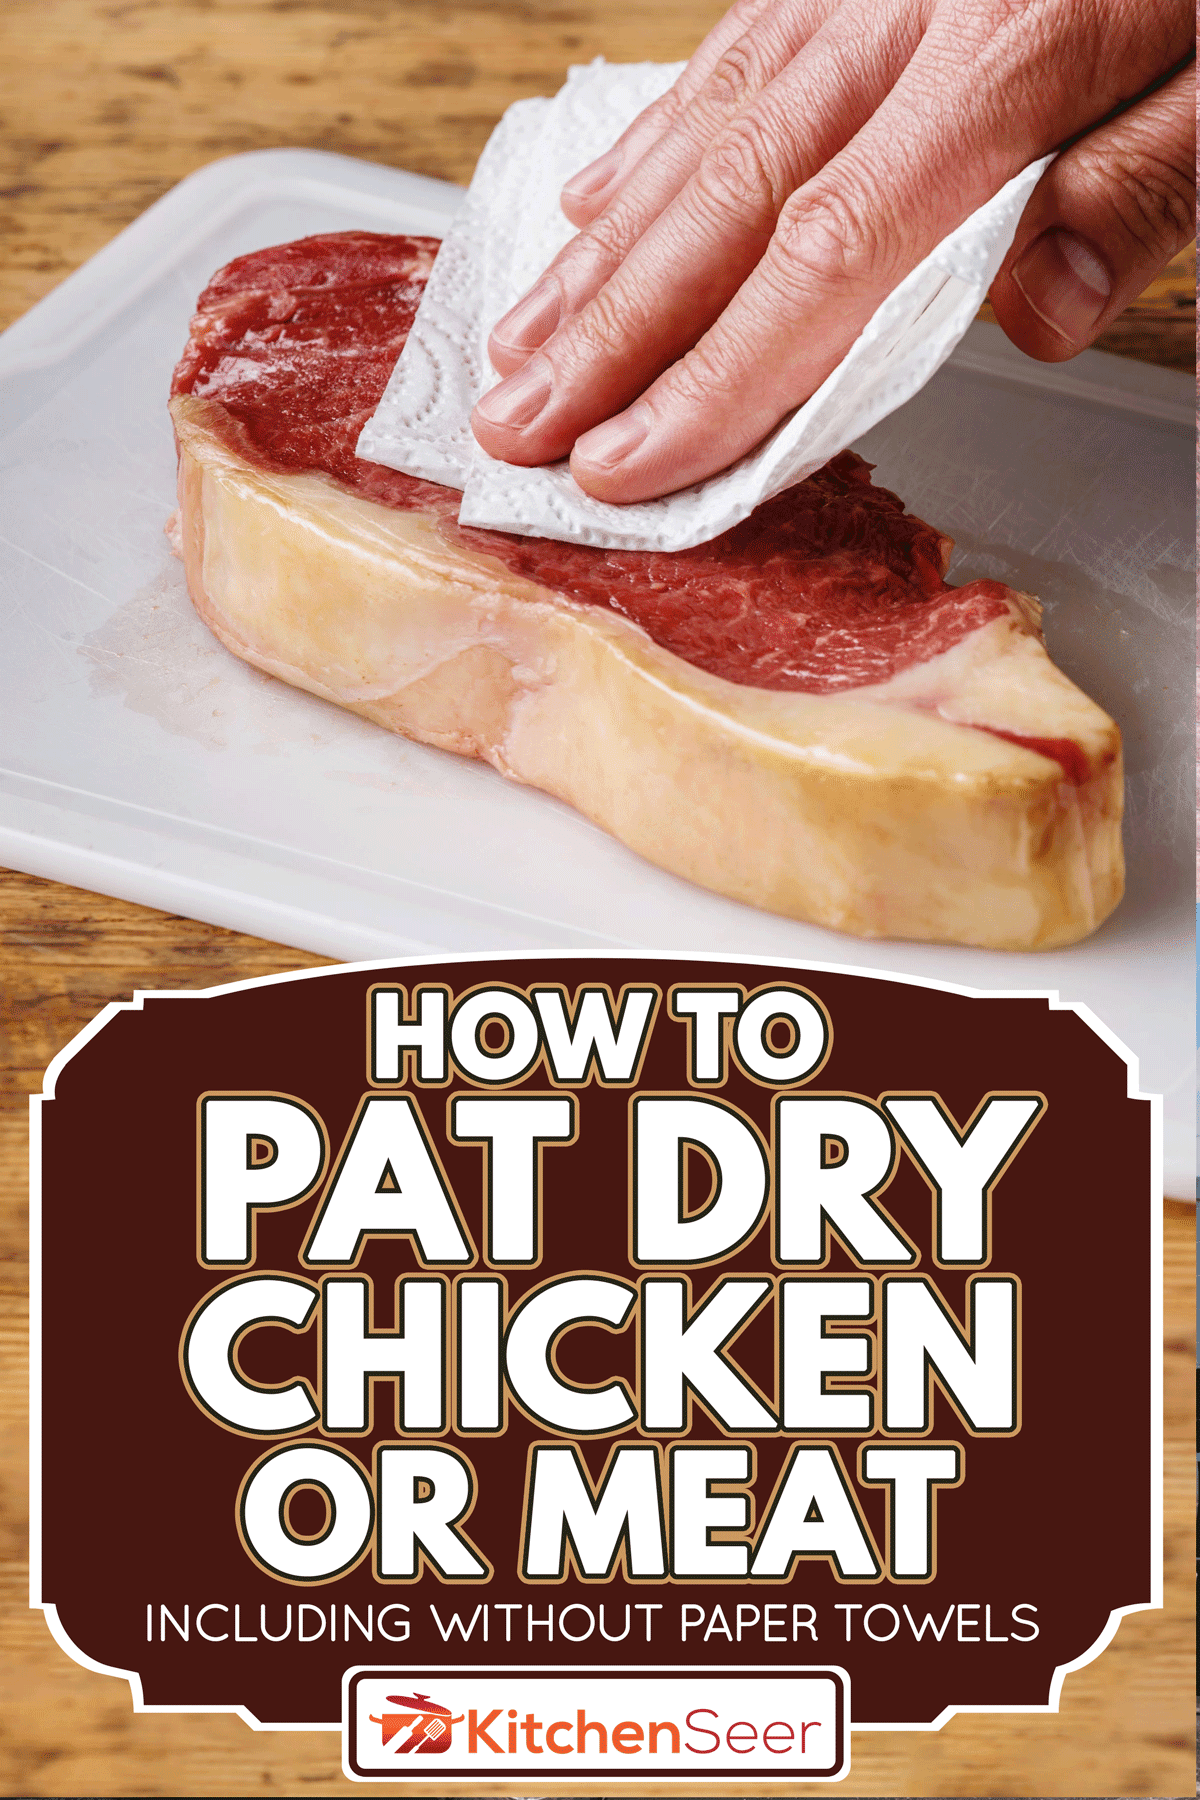 Raw meat steak drying up excess moisture with paper towel, How To Pat Dry Chicken Or Meat [Inc. Without Paper Towels]